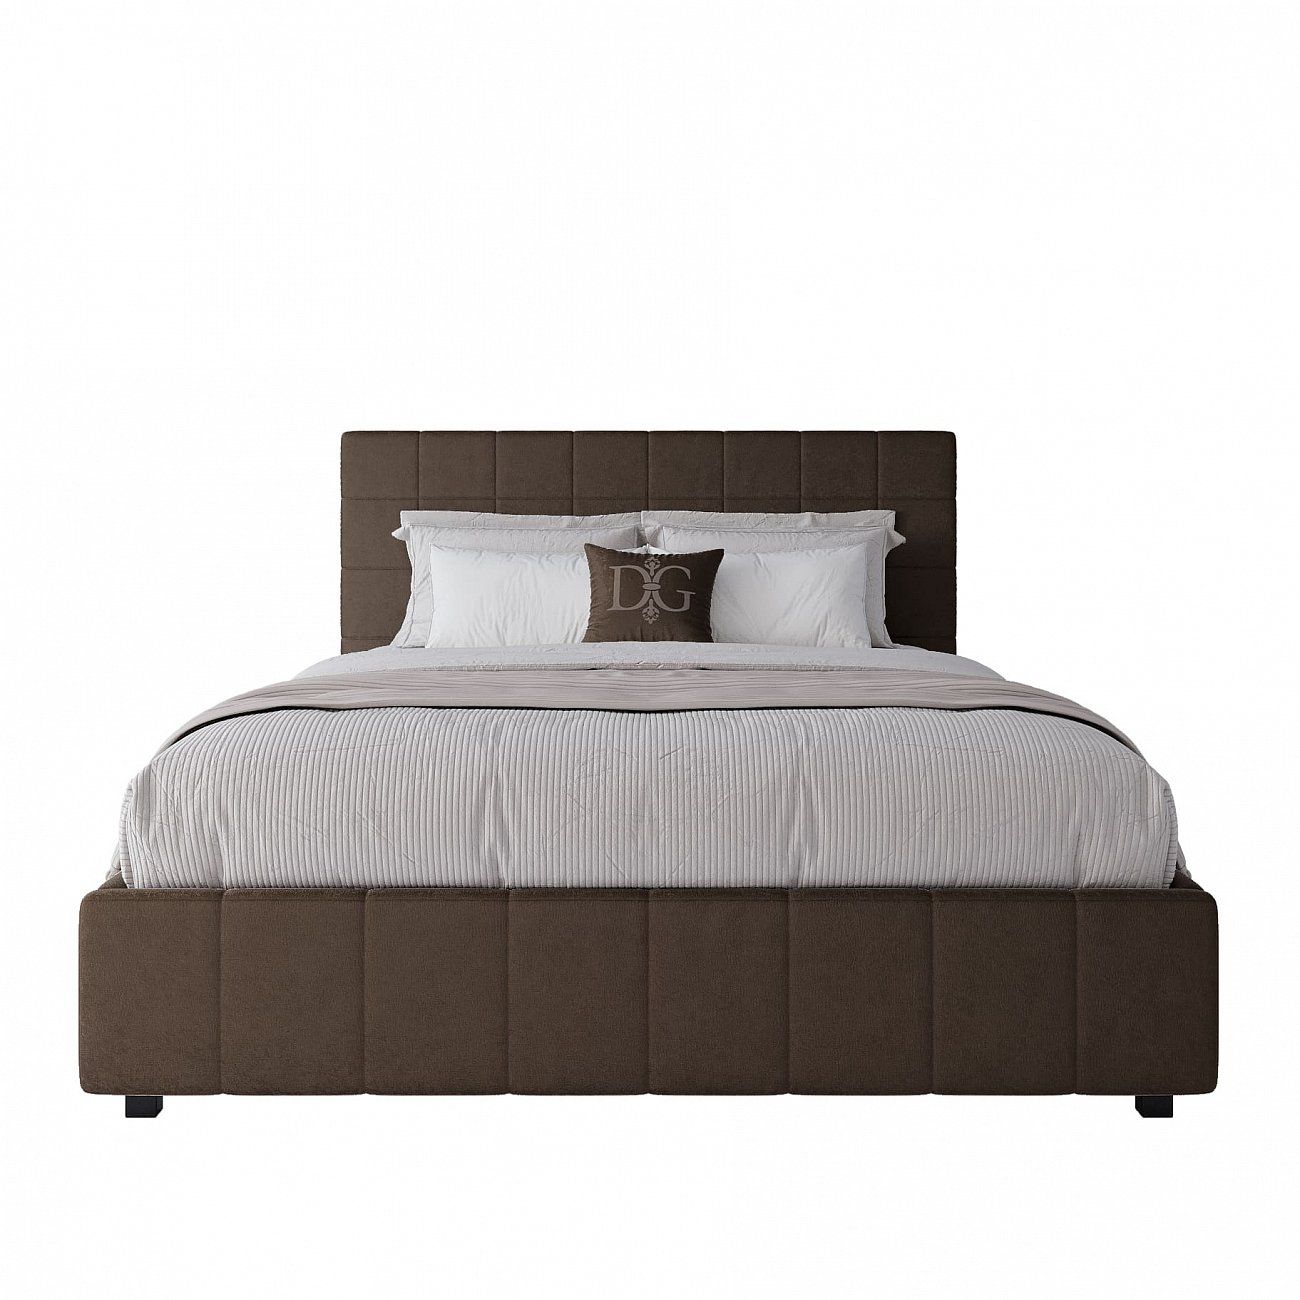 Double bed 160x200 brown Shining Modern